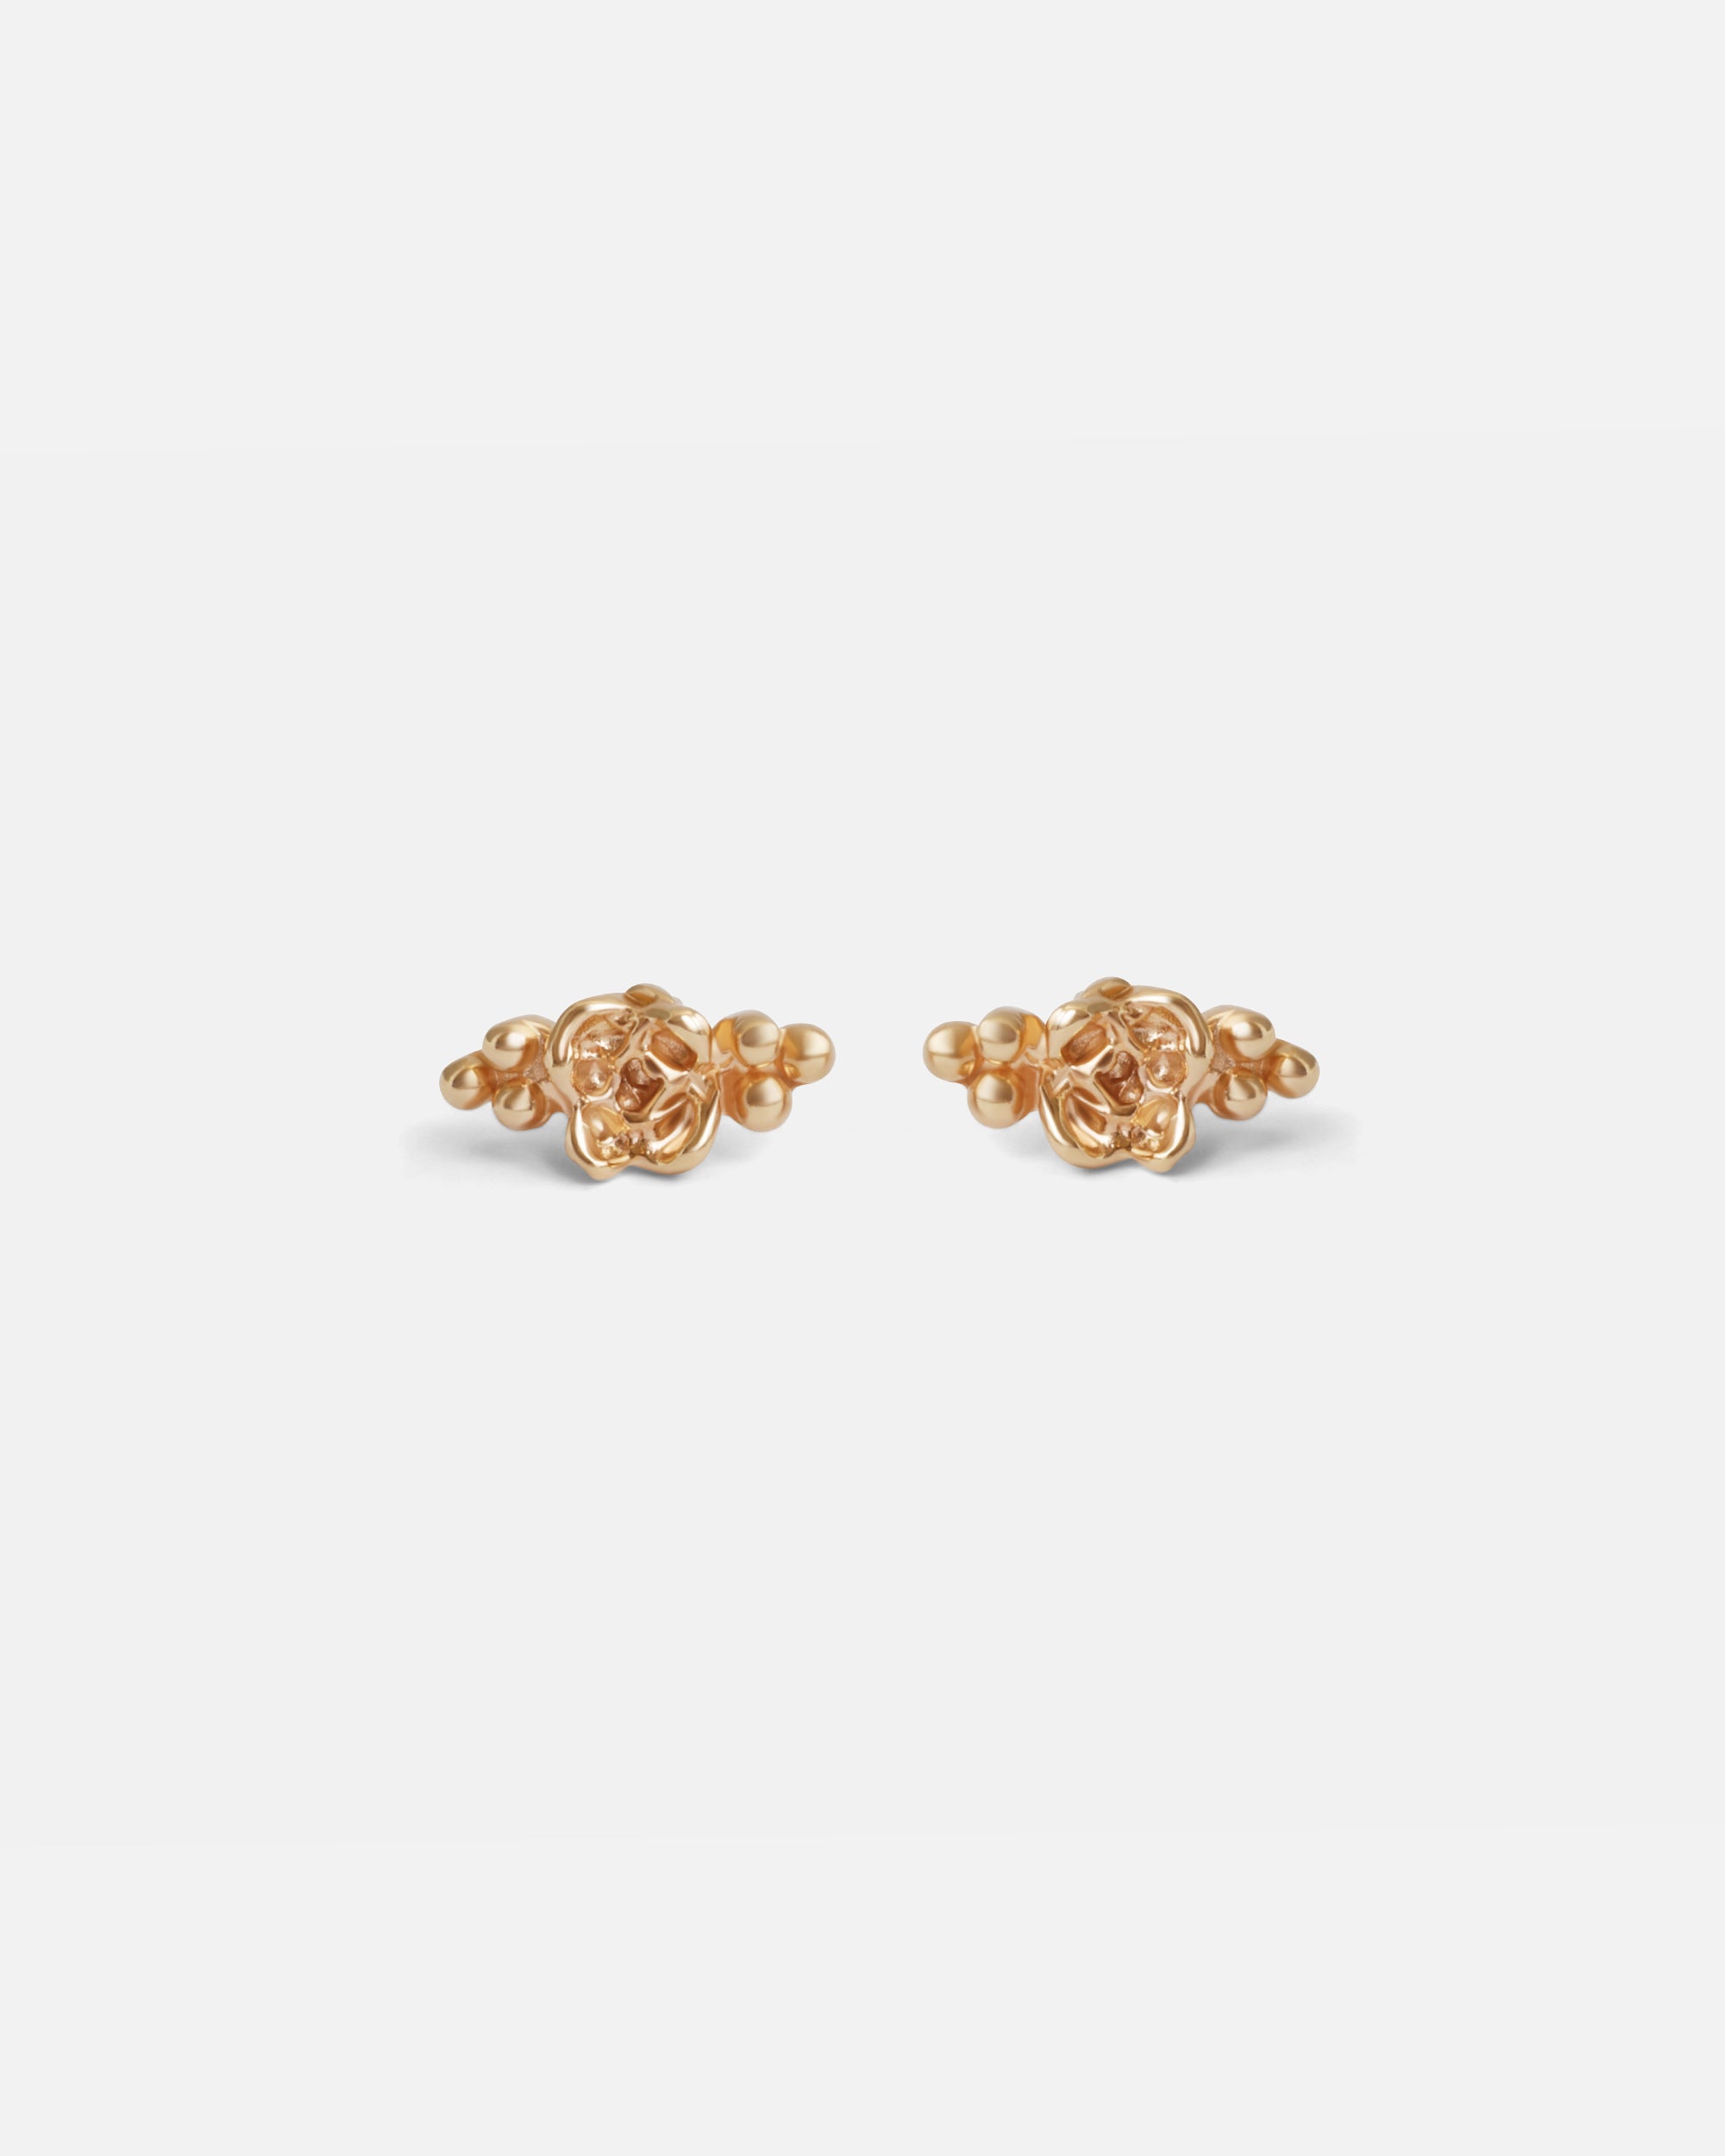 Kara Rose Studs By O Channell Designs in earrings Category